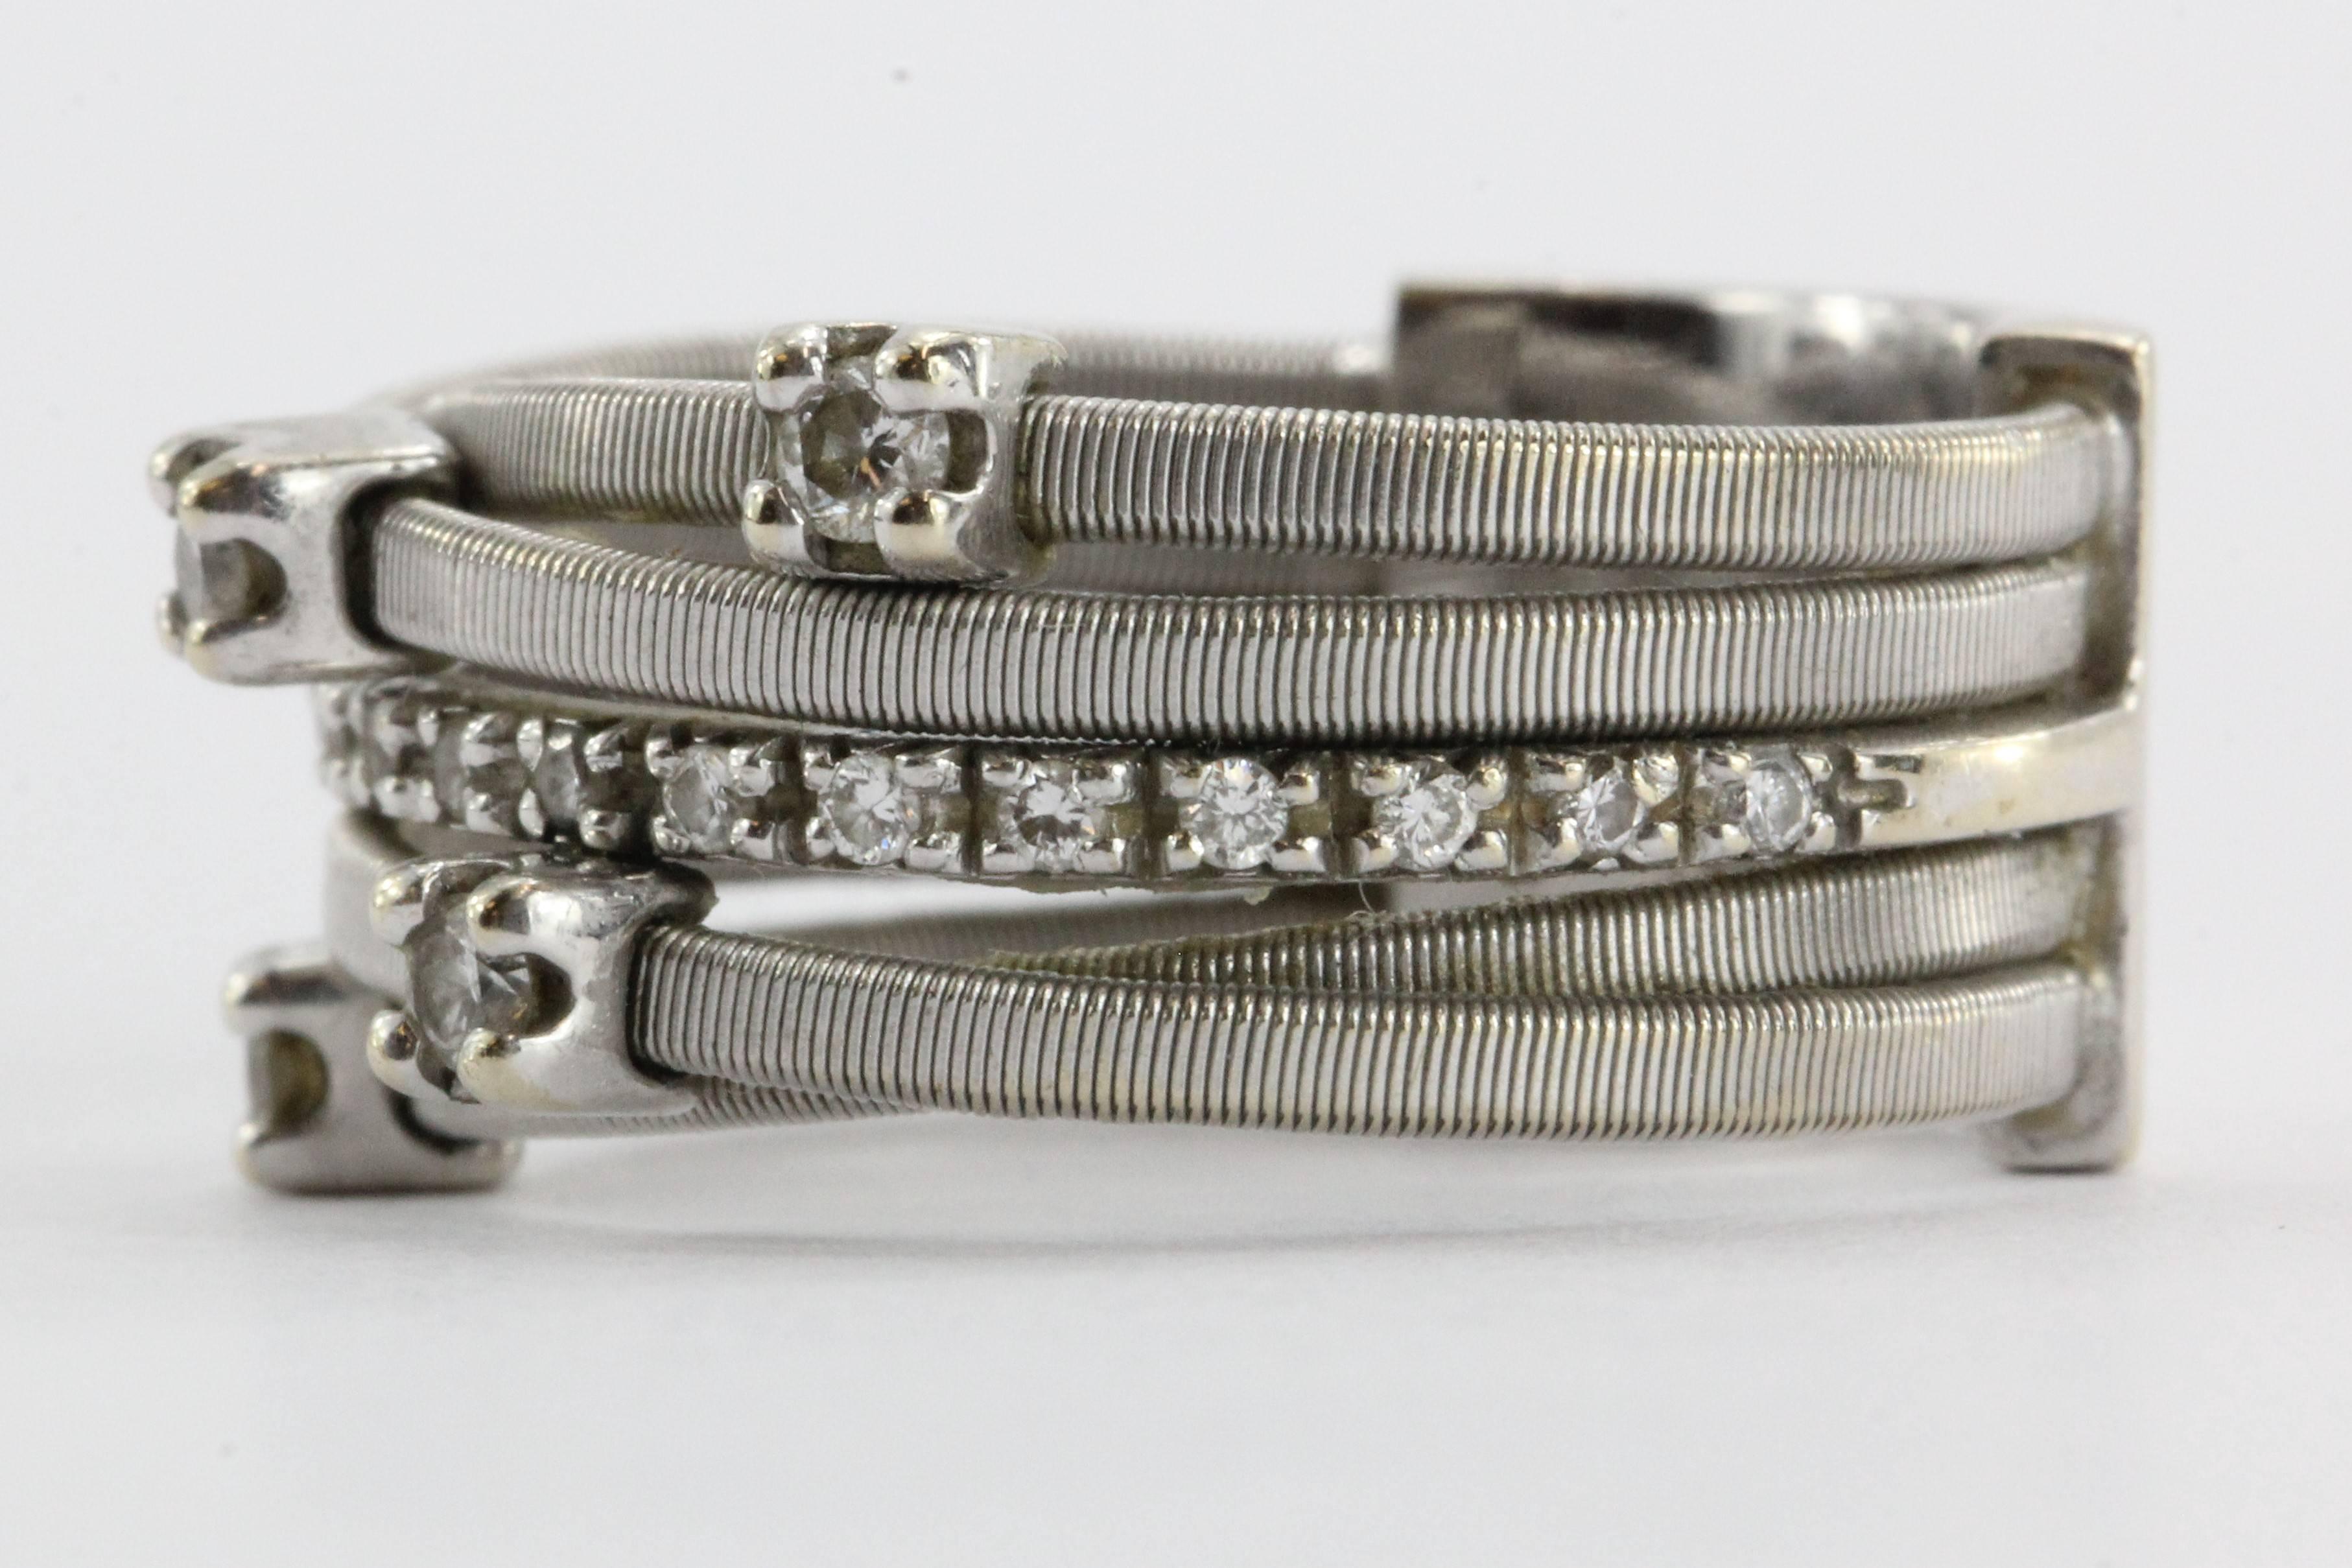  Marco Bicego GOA 18K White Gold 5 Row Diamond Ring. The ring is in excellent used estate condition, ready to wear. There is minor evidence of wear, only noticeable upon close inspection. The piece is signed 